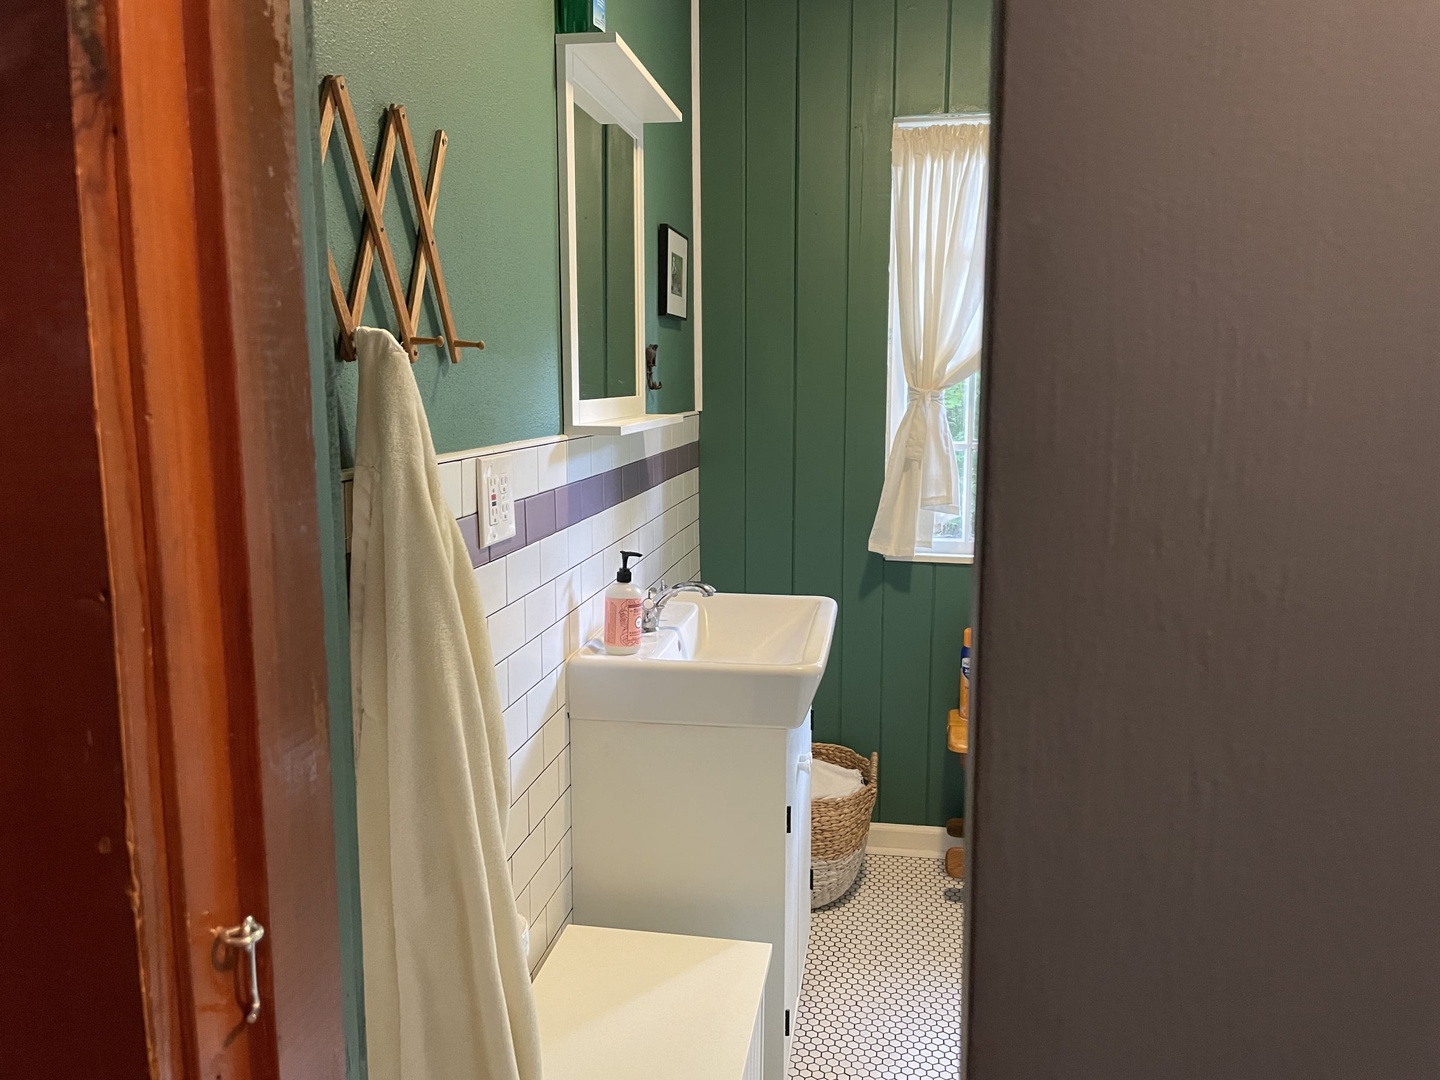 Brightwood Vacation Rentals, Springbrook Cabin - Newly remodeled bathroom